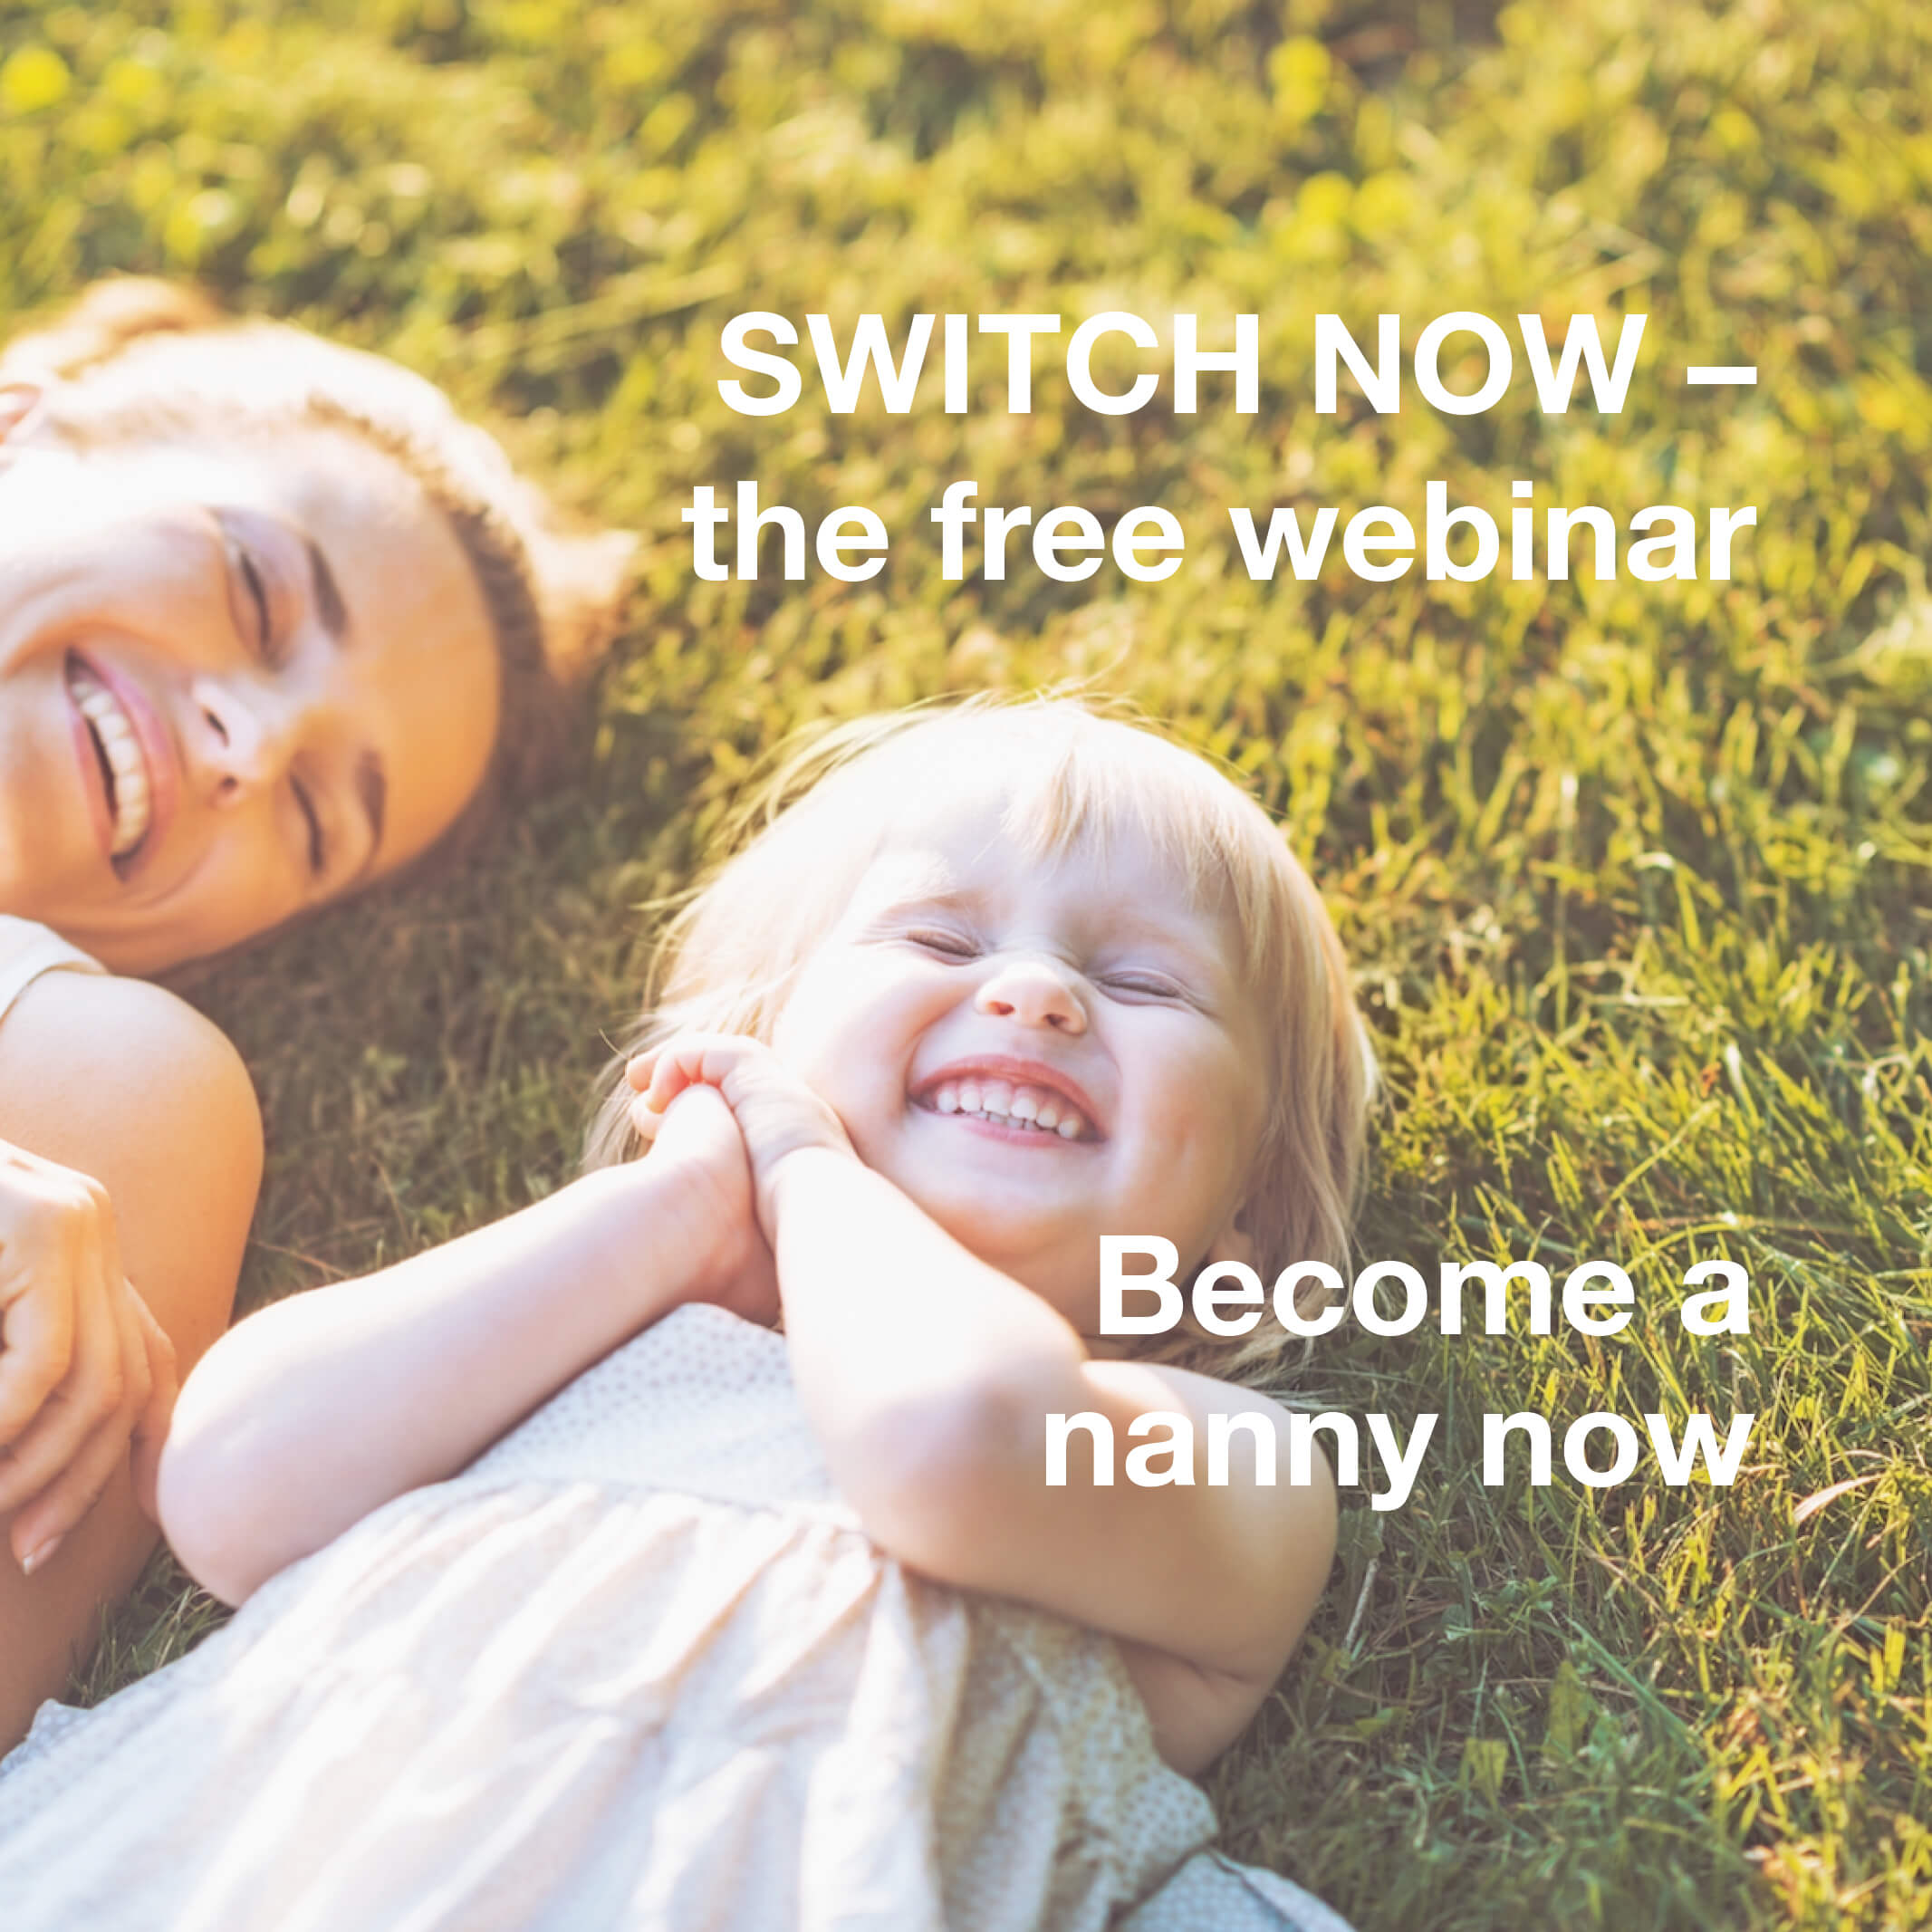 Become a nanny now. Time for change.